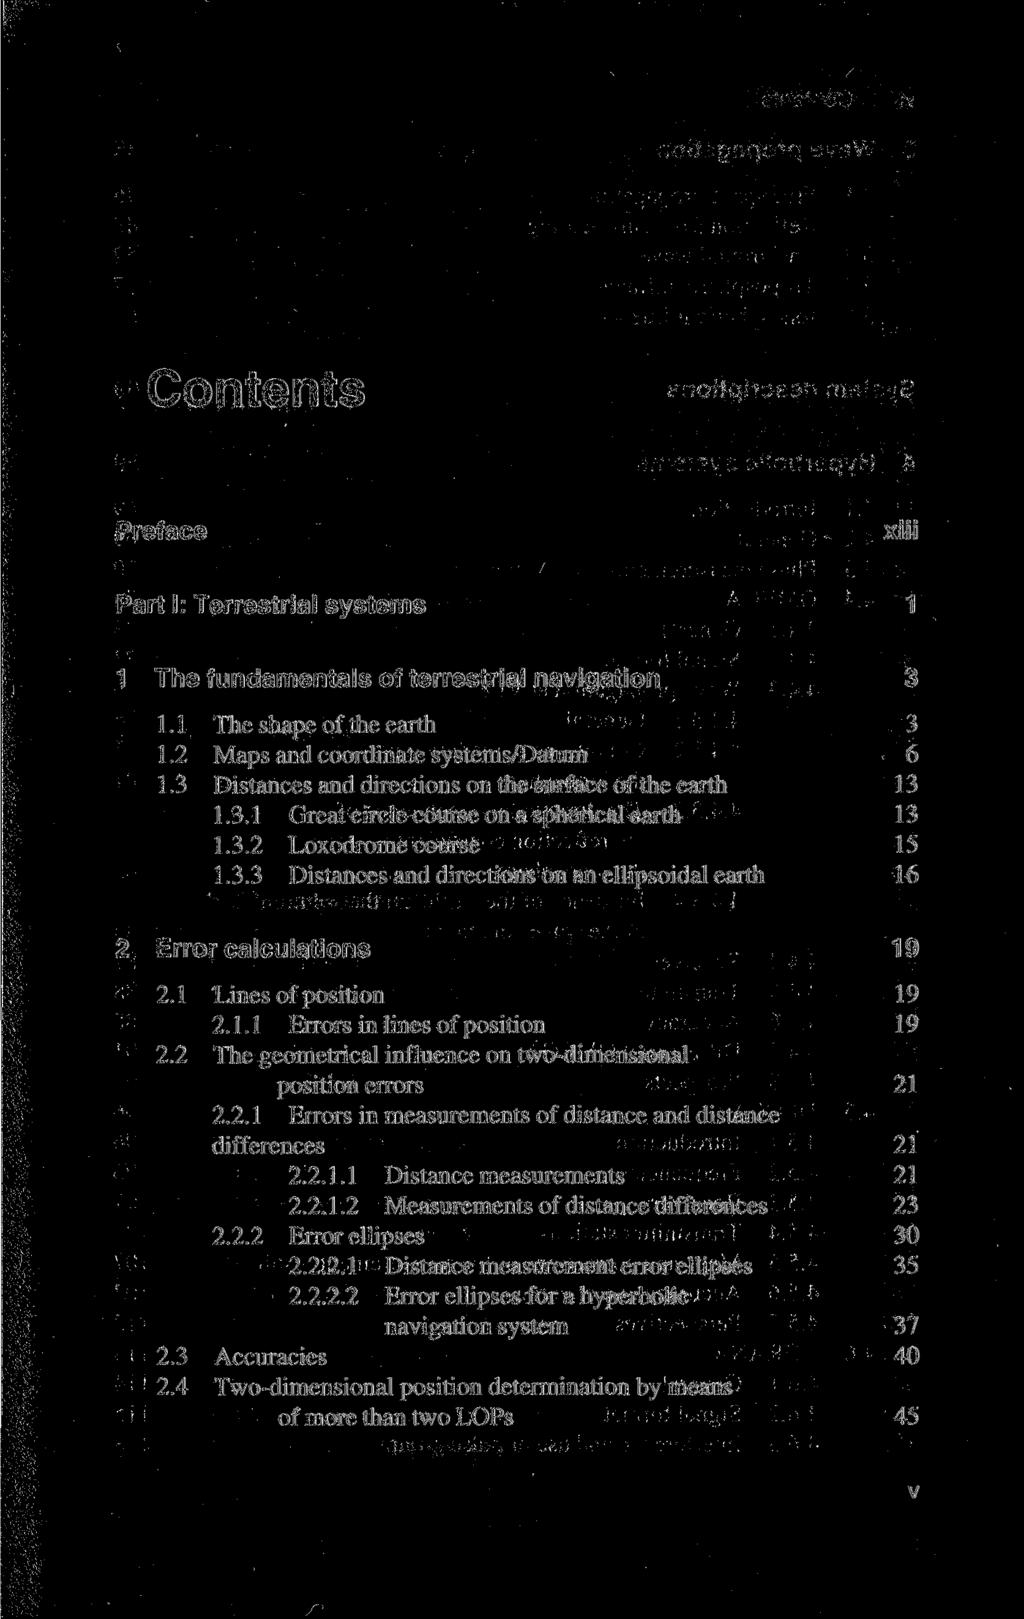 Contents Preface xiii Part I: Terrestrial Systems 1 1 The f undamentais of terrestrial navigation 3 1.1 The shape of the earth 3 1.2 Maps and coordinate systems/datum 6 1.